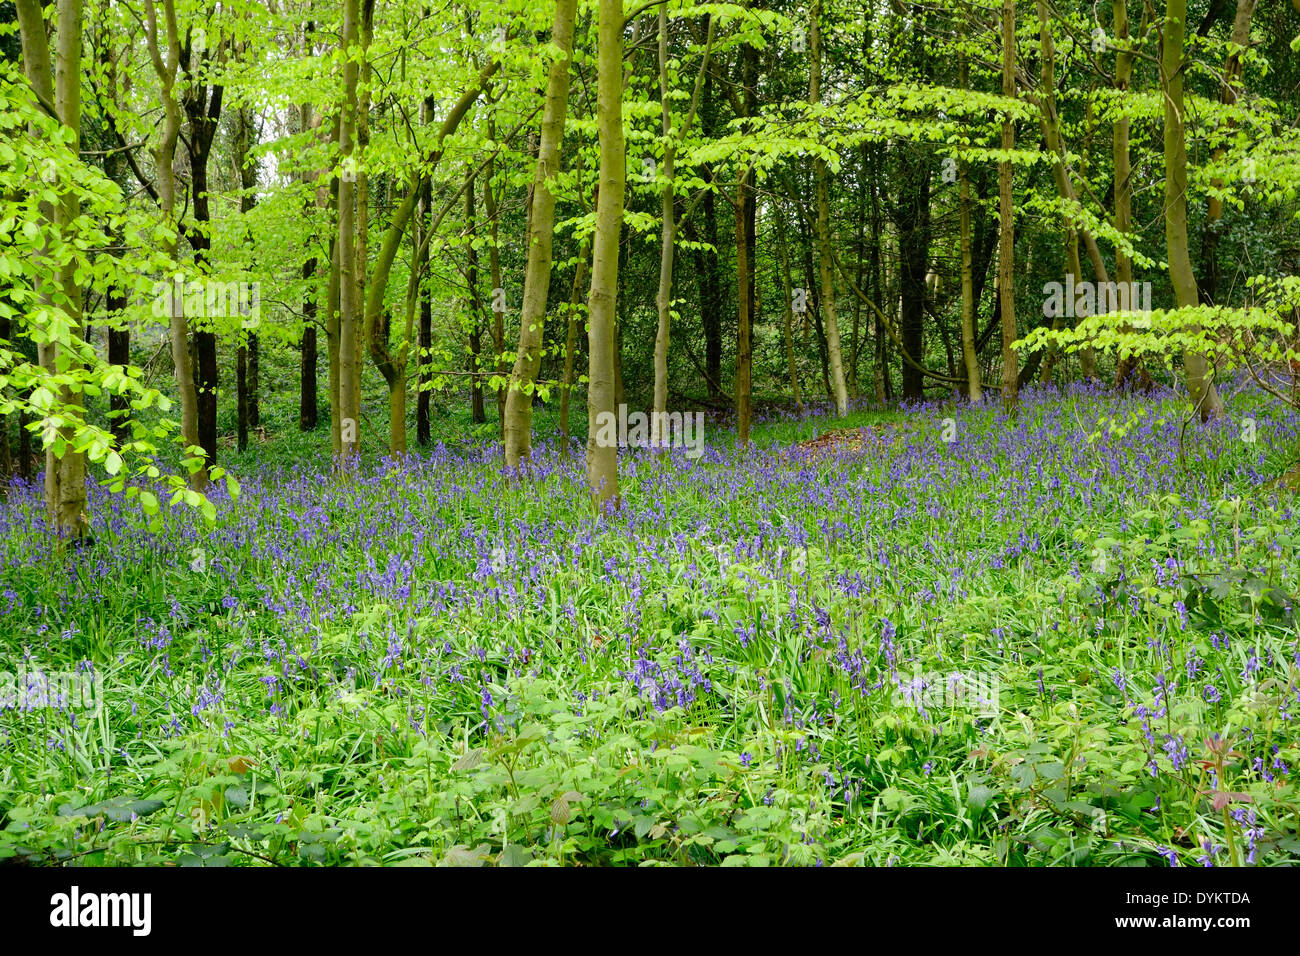 Bluebell Wood at Saltwell's Local Nature Reserve, Quarry Bank, West Midlands, England, UK Stock Photo